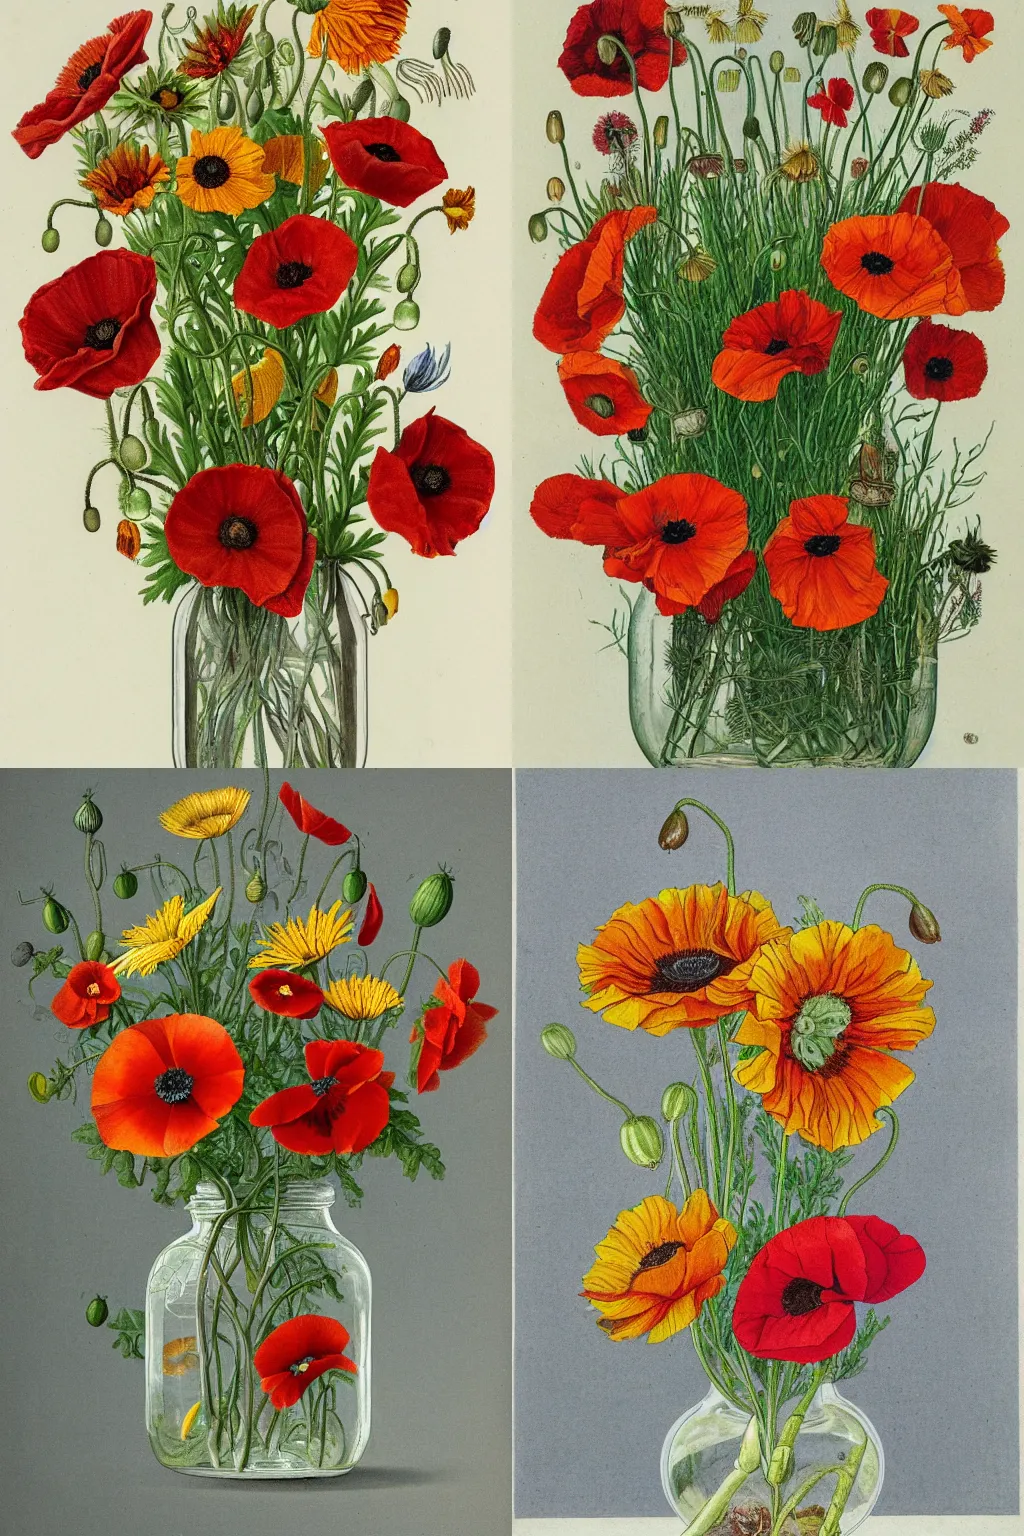 Prompt: botanical illustration of poppies and sunflowers in a glass jar